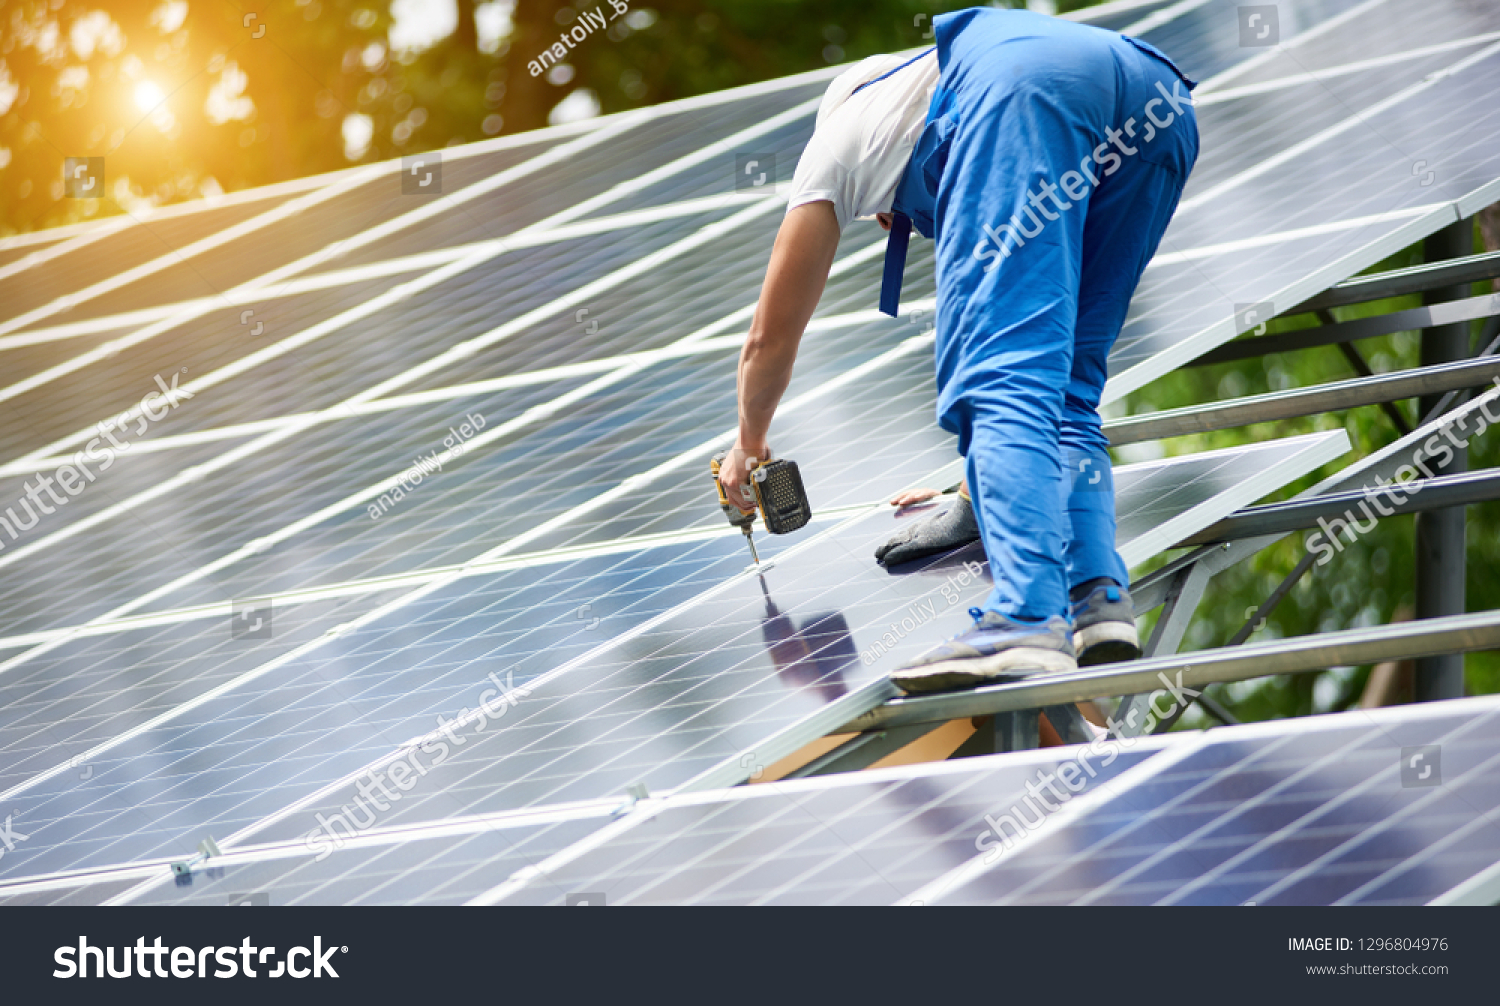 Construction worker connecting photo voltaic panel to solar system using screwdriver on shiny surface and lit by sun green tree background. Alternative energy and financial investment concept. #1296804976